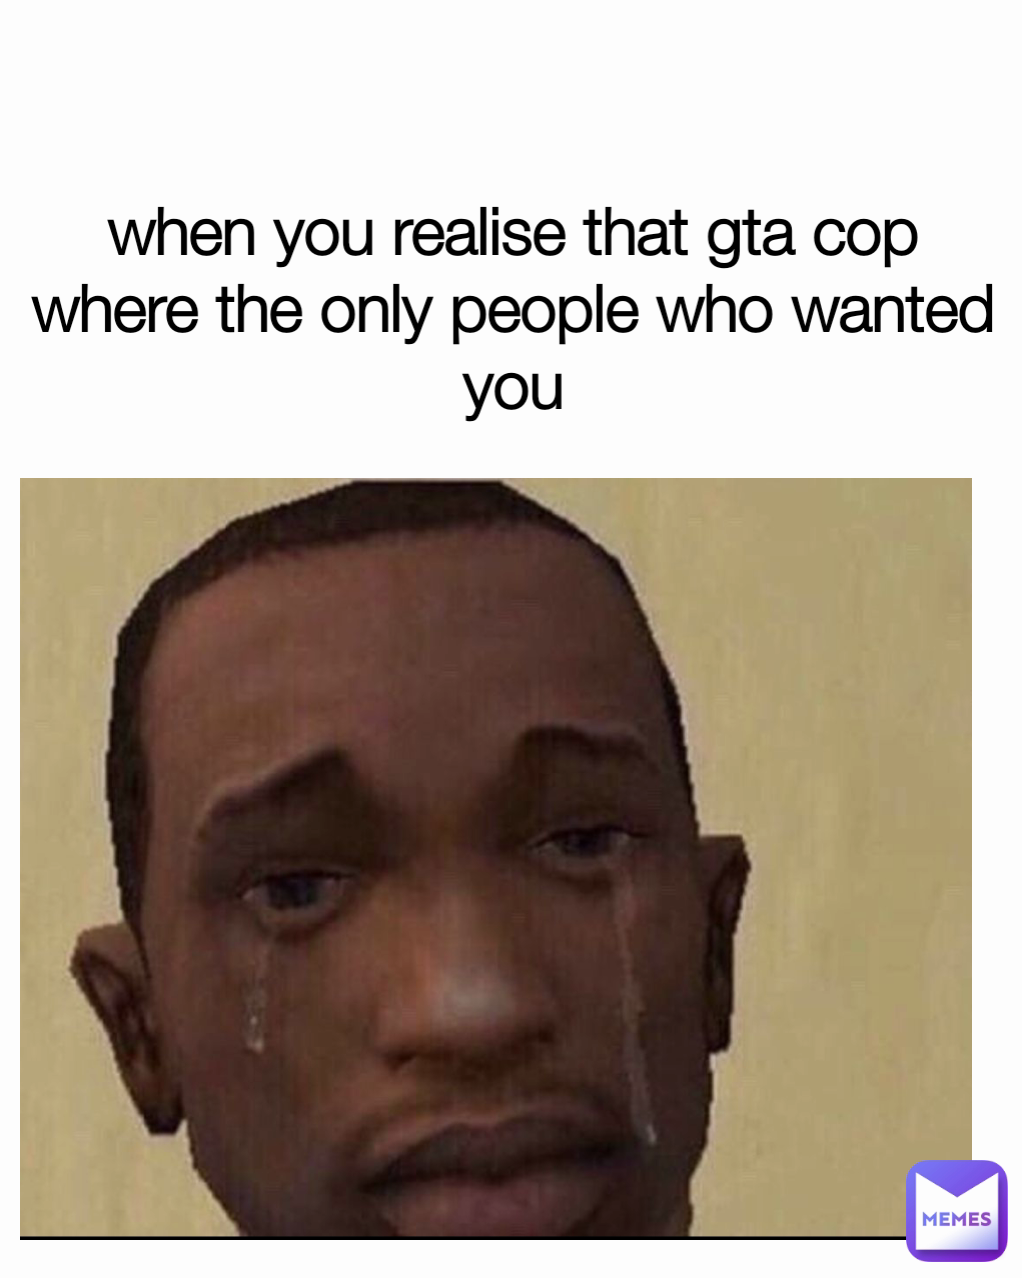 when you realise that gta cop where the only people who wanted you